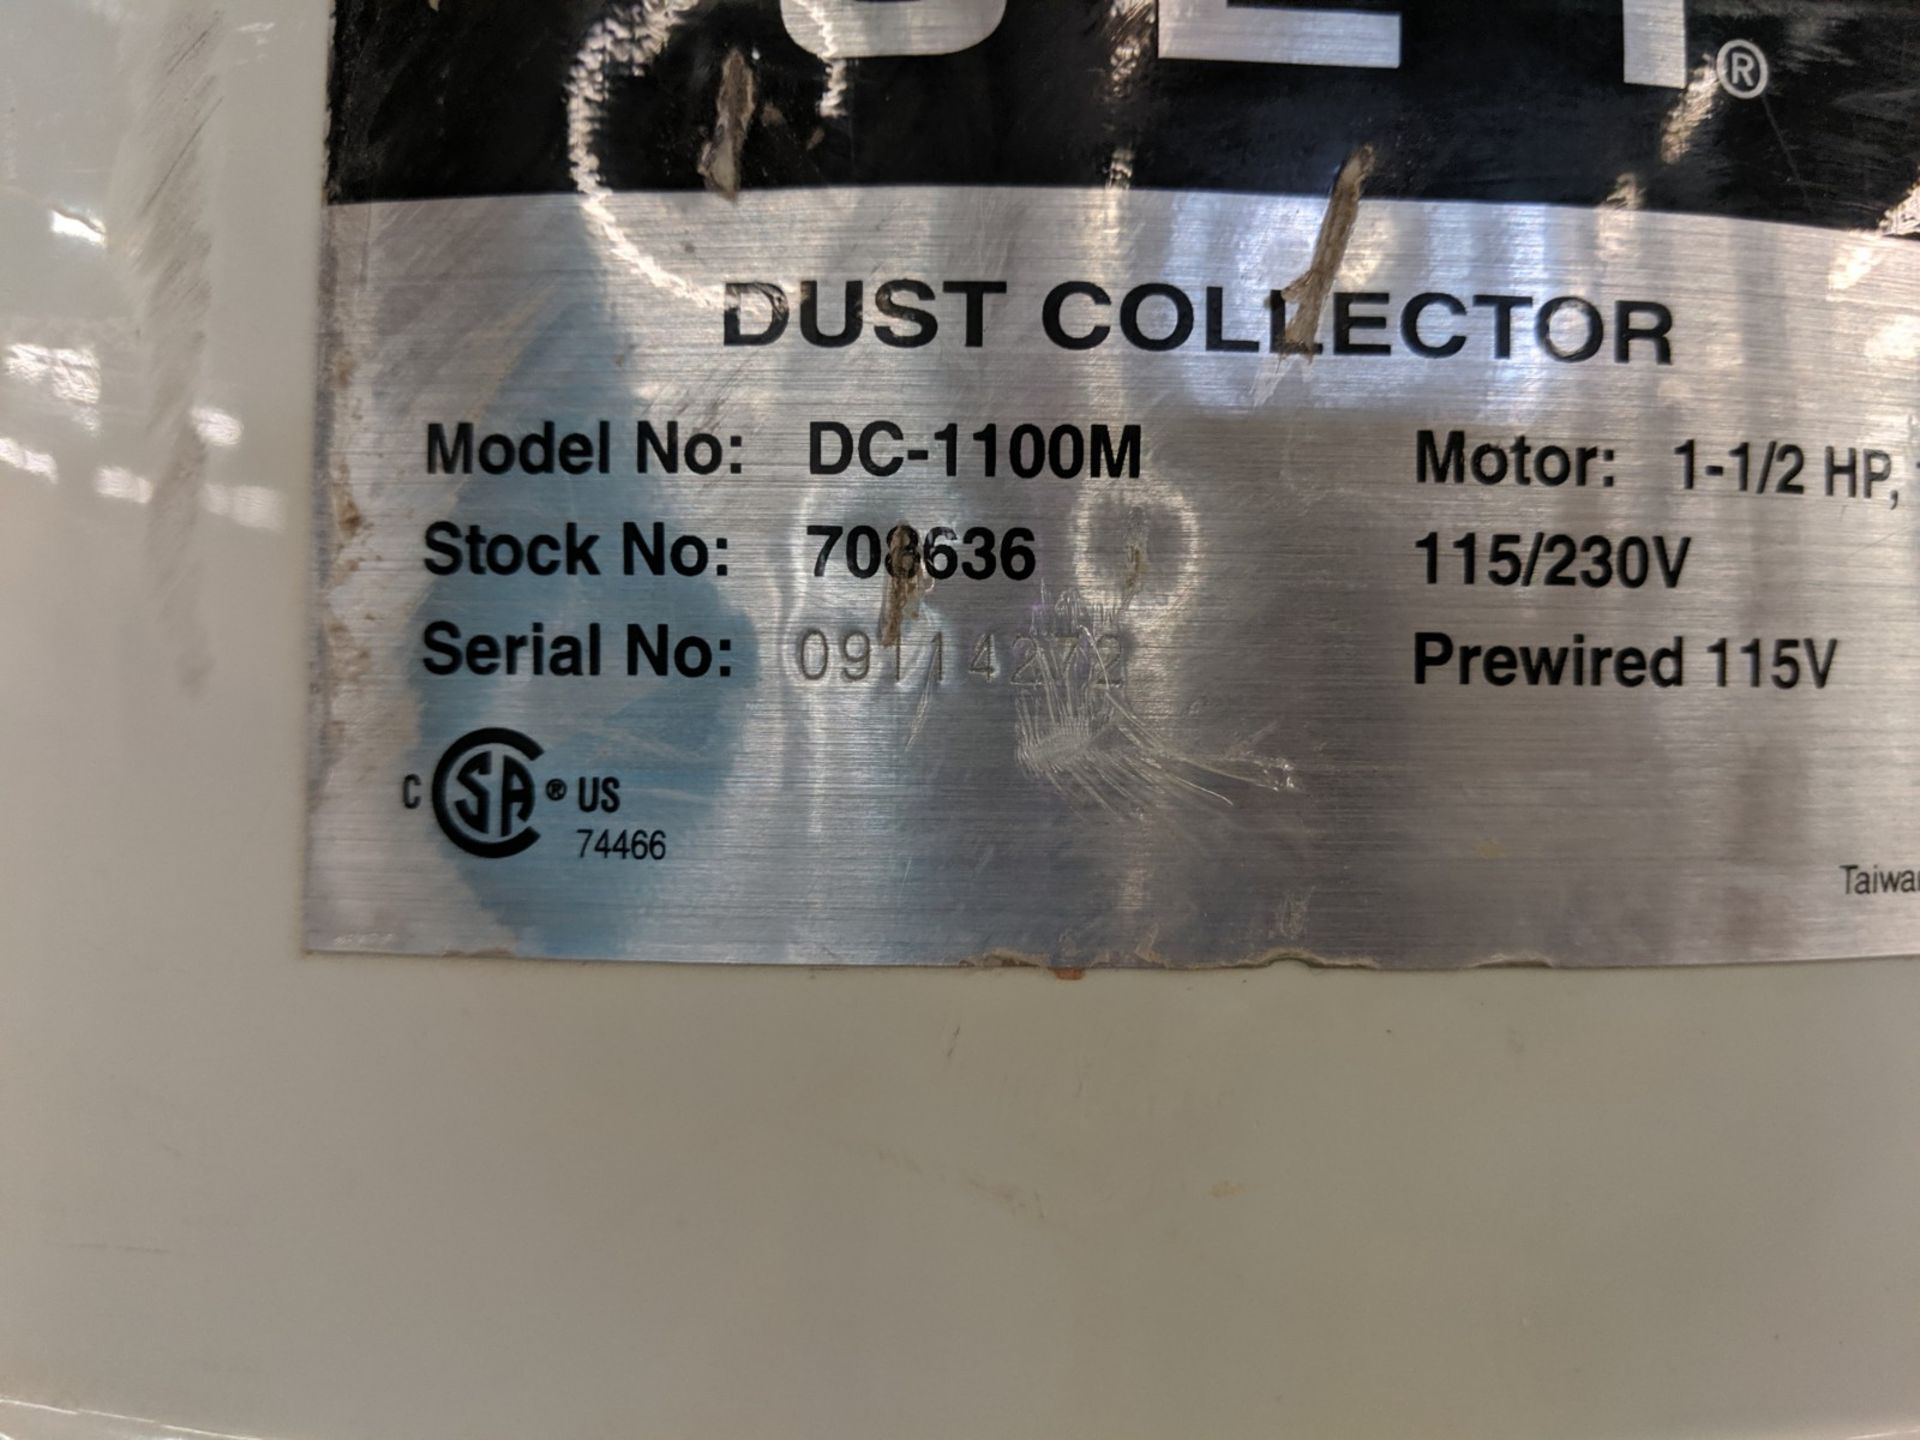 Jet Dust Collector - Image 2 of 2